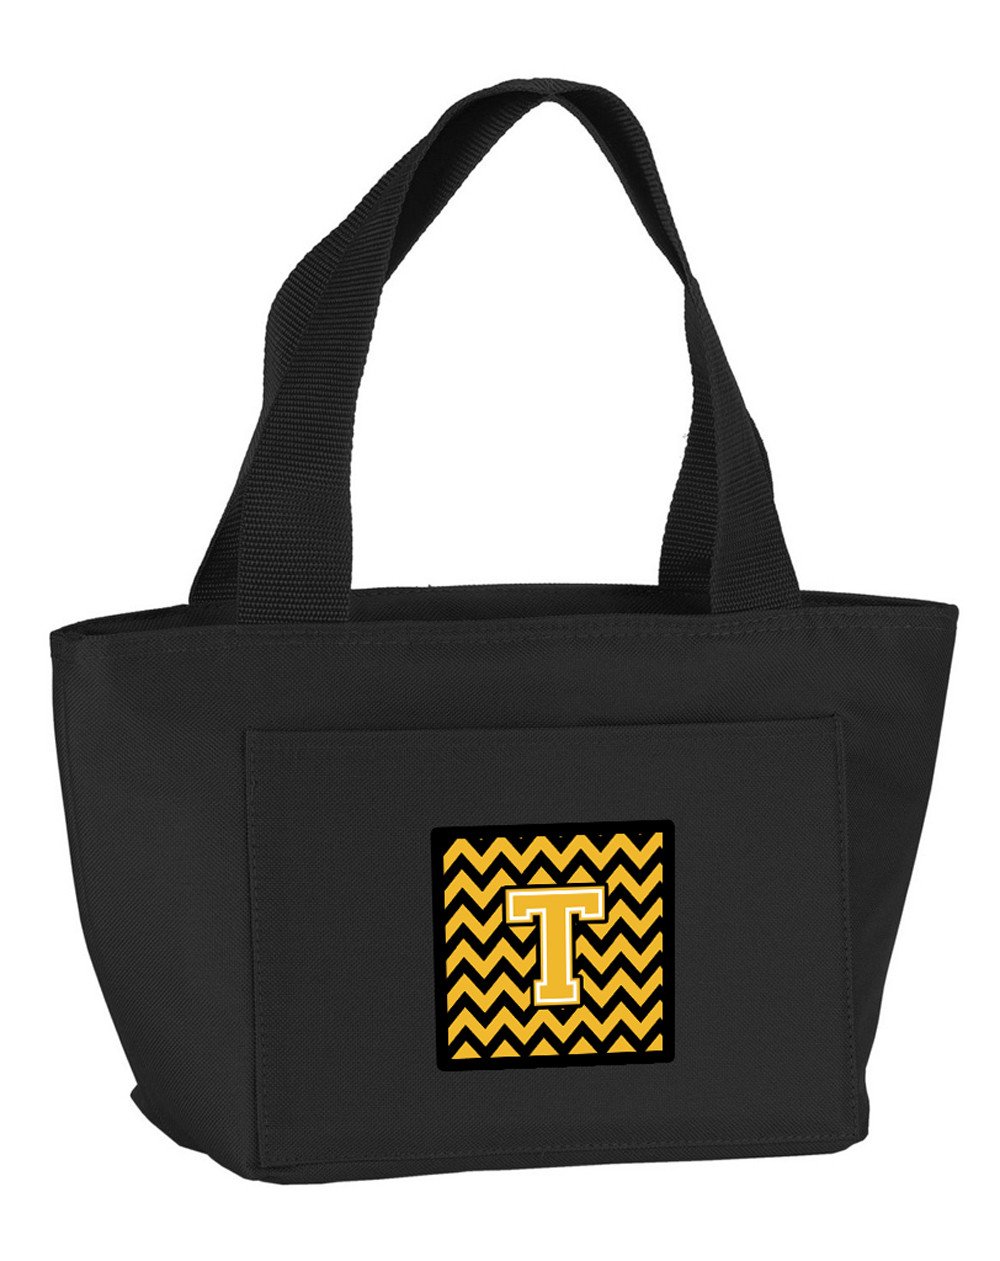 Letter T Chevron Black and Gold Lunch Bag CJ1053-TBK-8808 by Caroline's Treasures